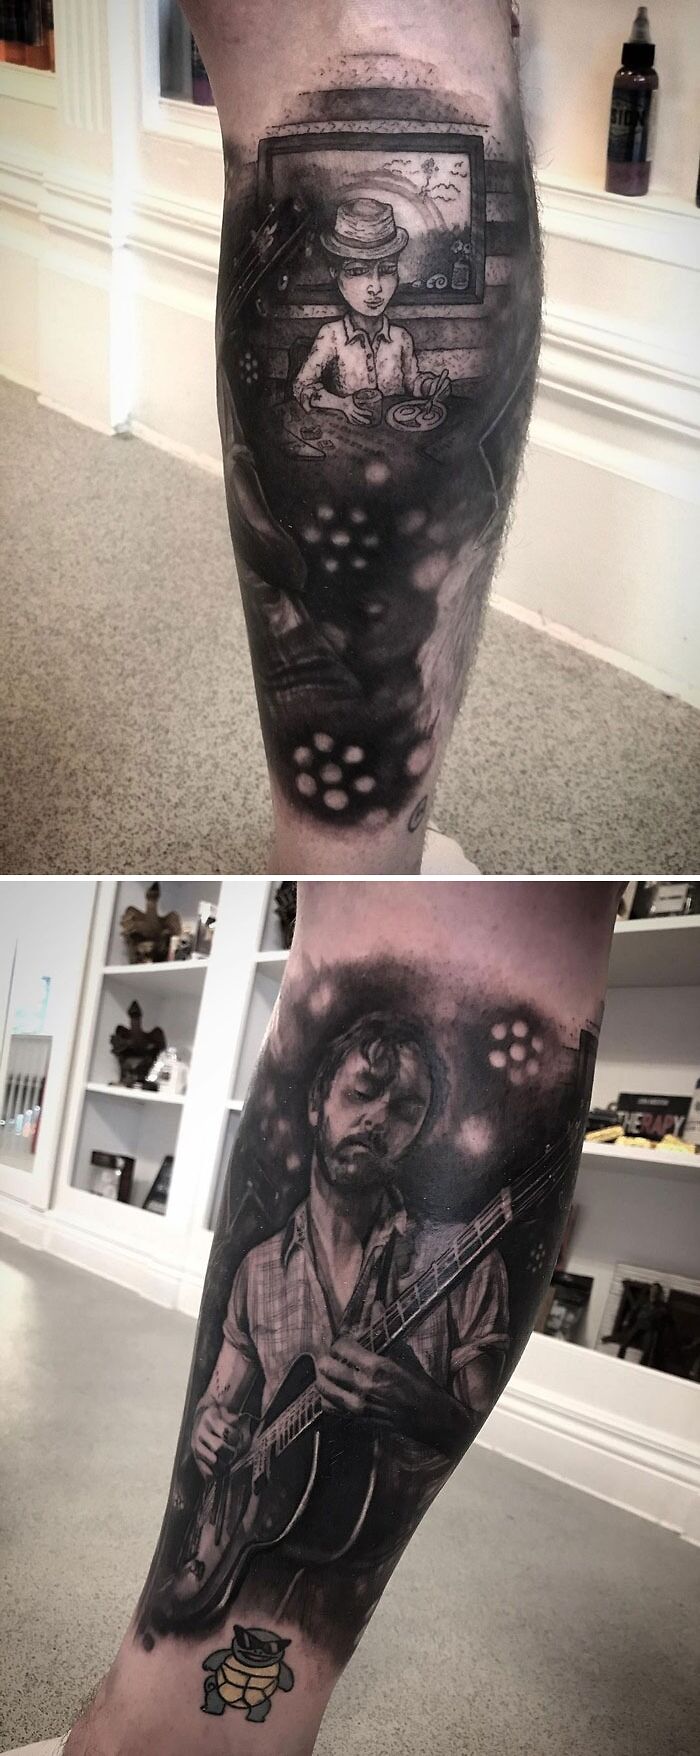 We Finished His Shakey Graves Portrait And Added A ‘Sunnyside Up’ Paulo